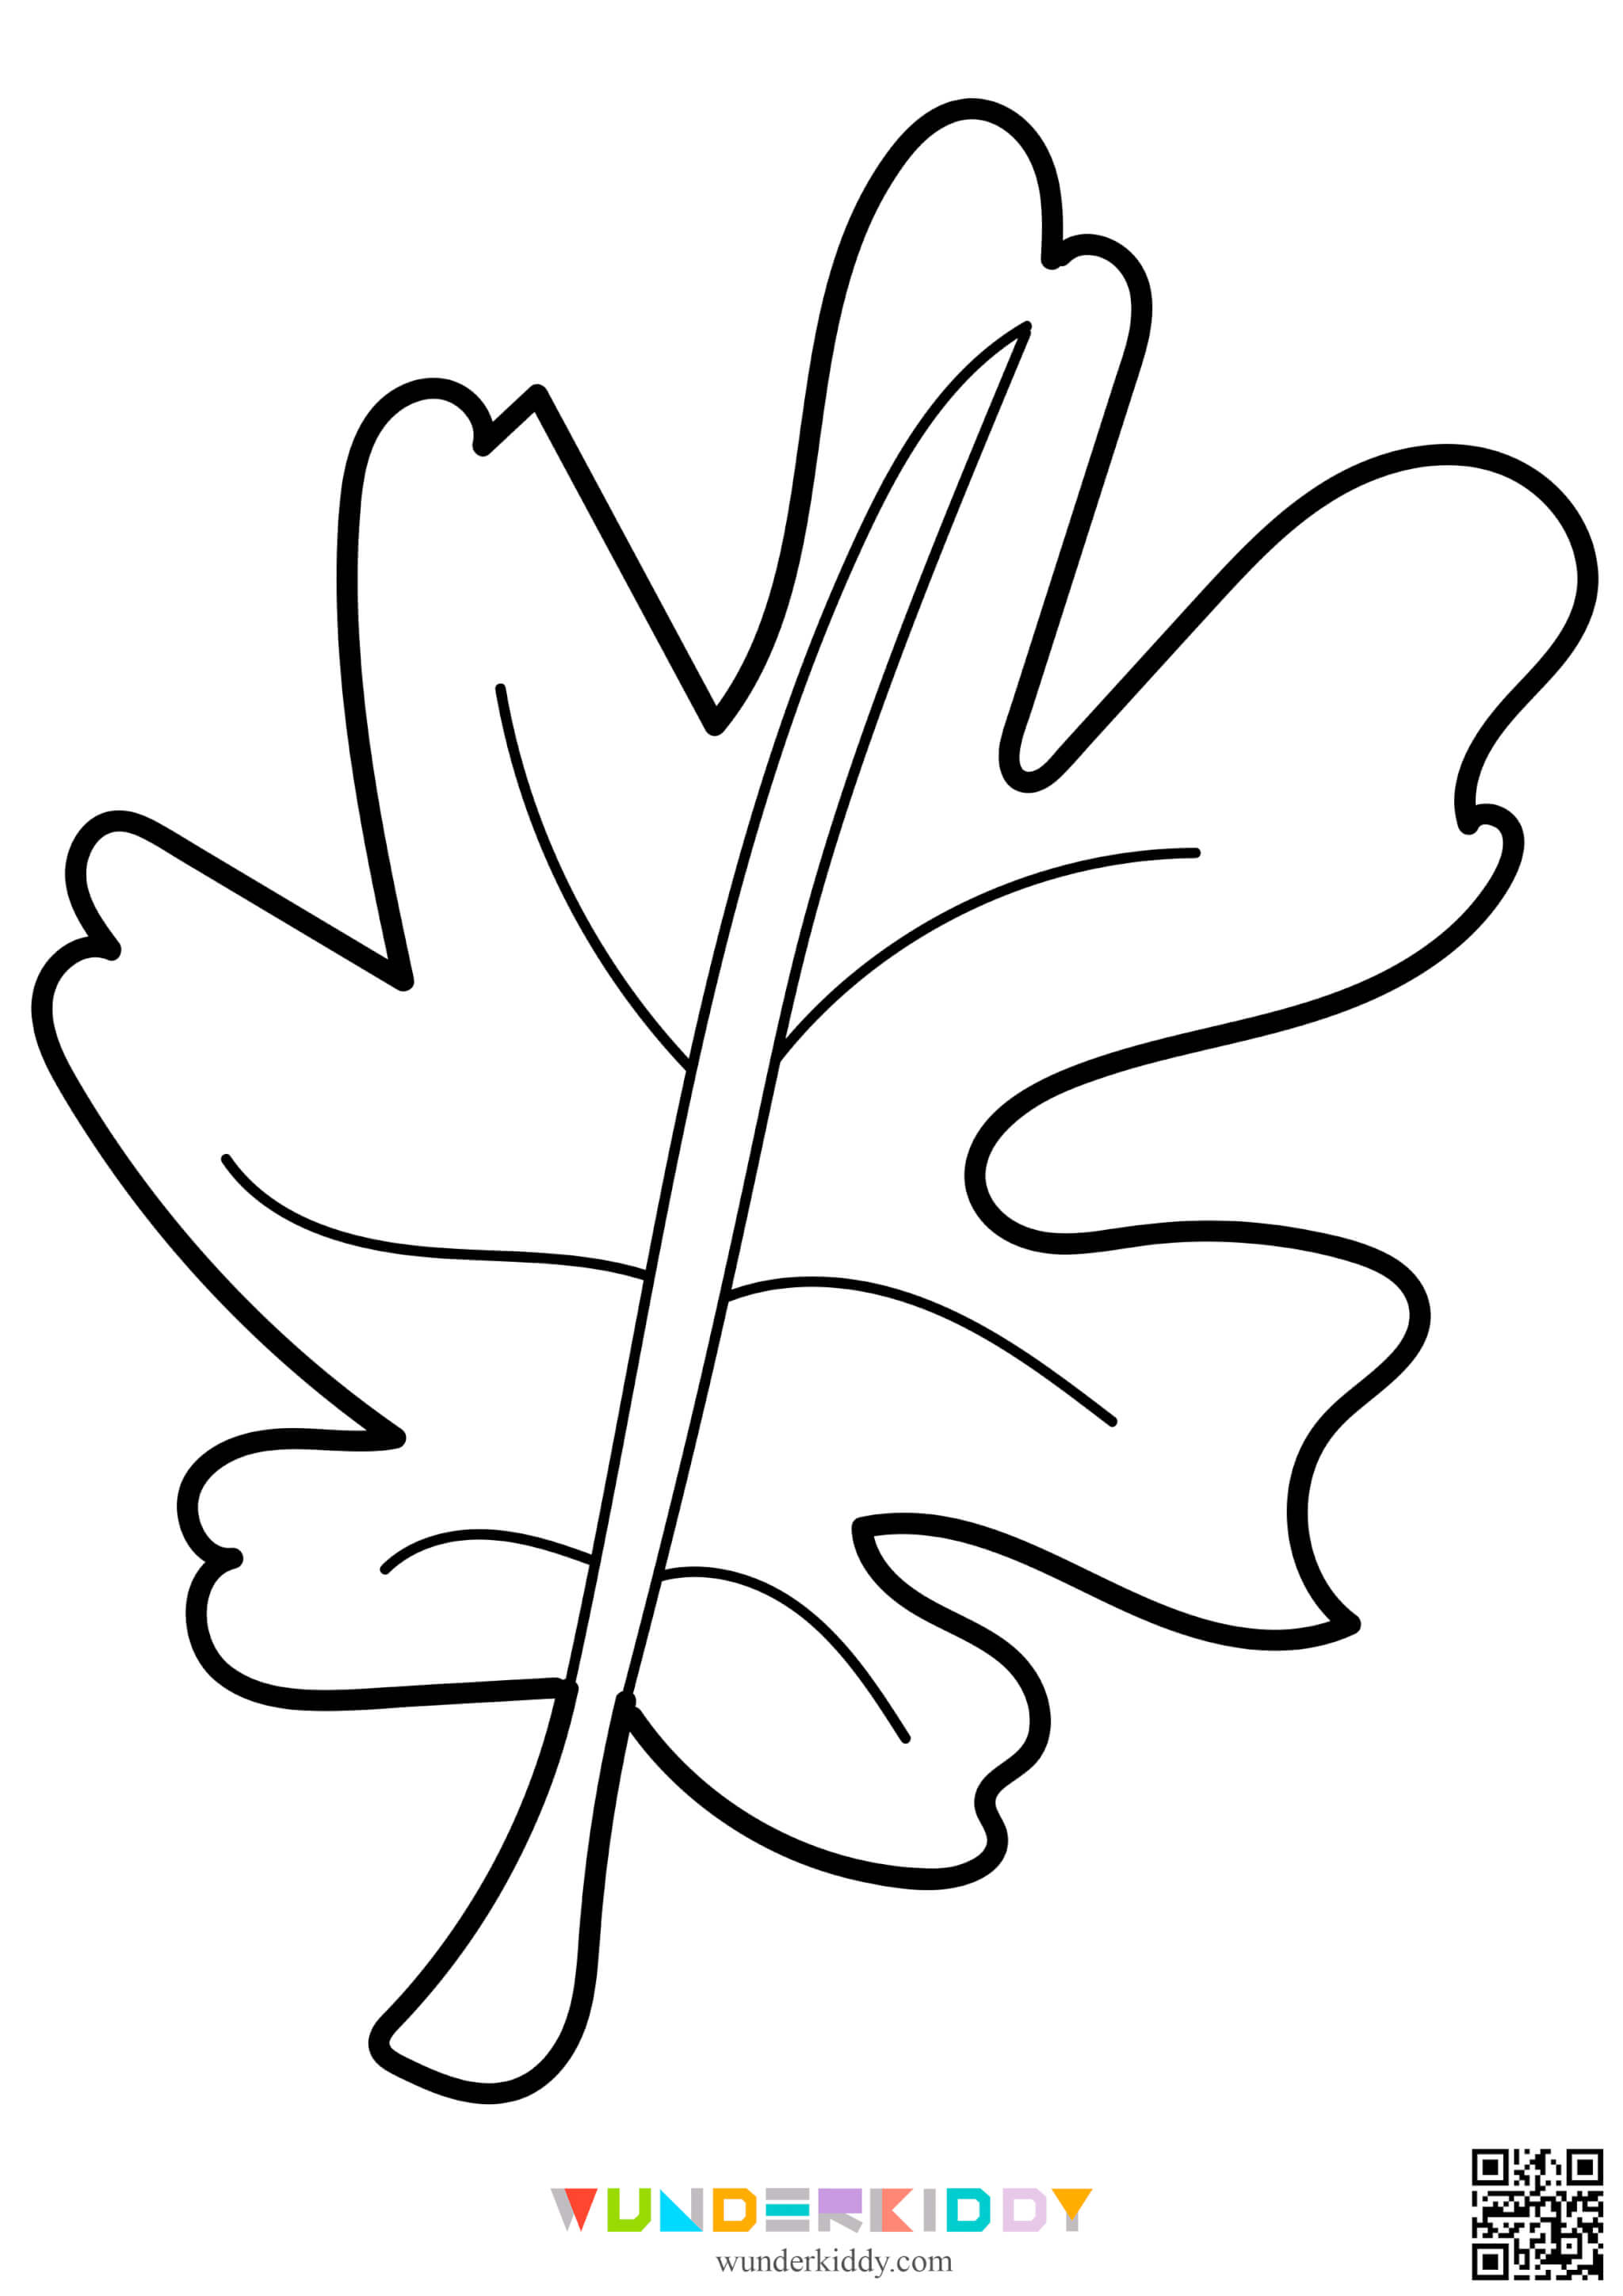 Fall Leaves Template - Image 7